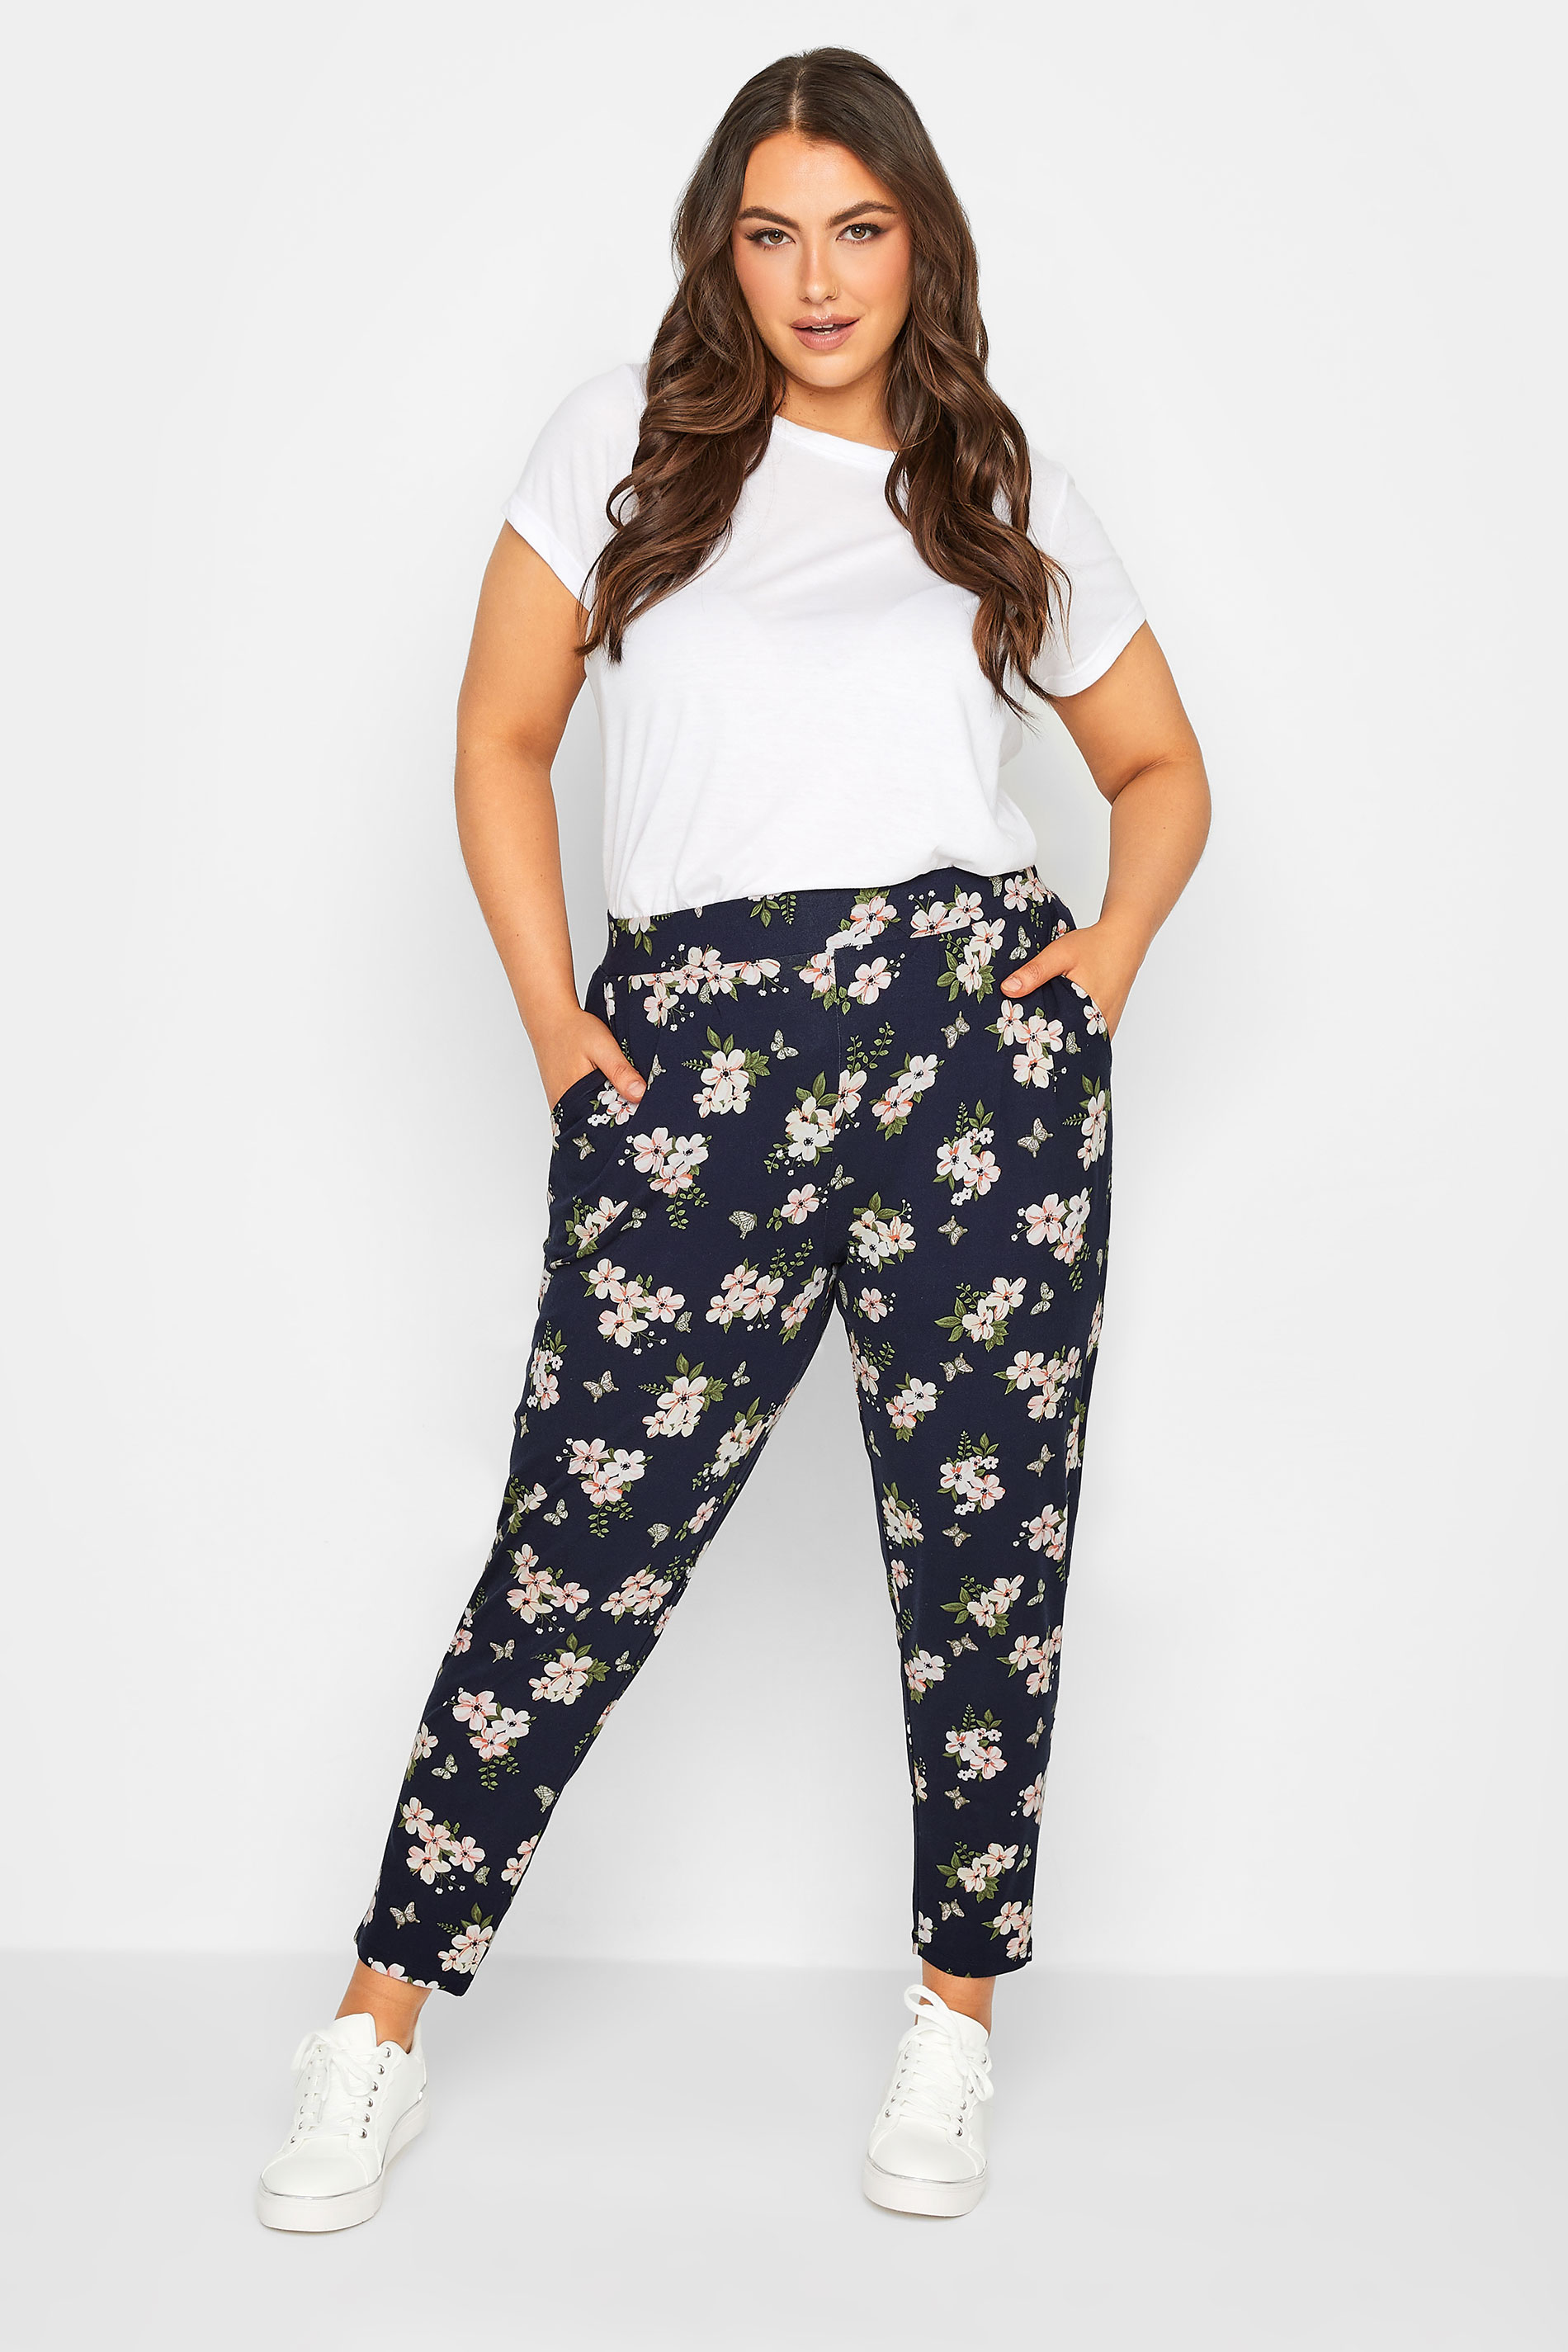 MIXT by Nykaa Fashion Jeans  Buy MIXT by Nykaa Fashion Blue And White  Floral Print High Waist Straight Fit Denims Online  Nykaa Fashion